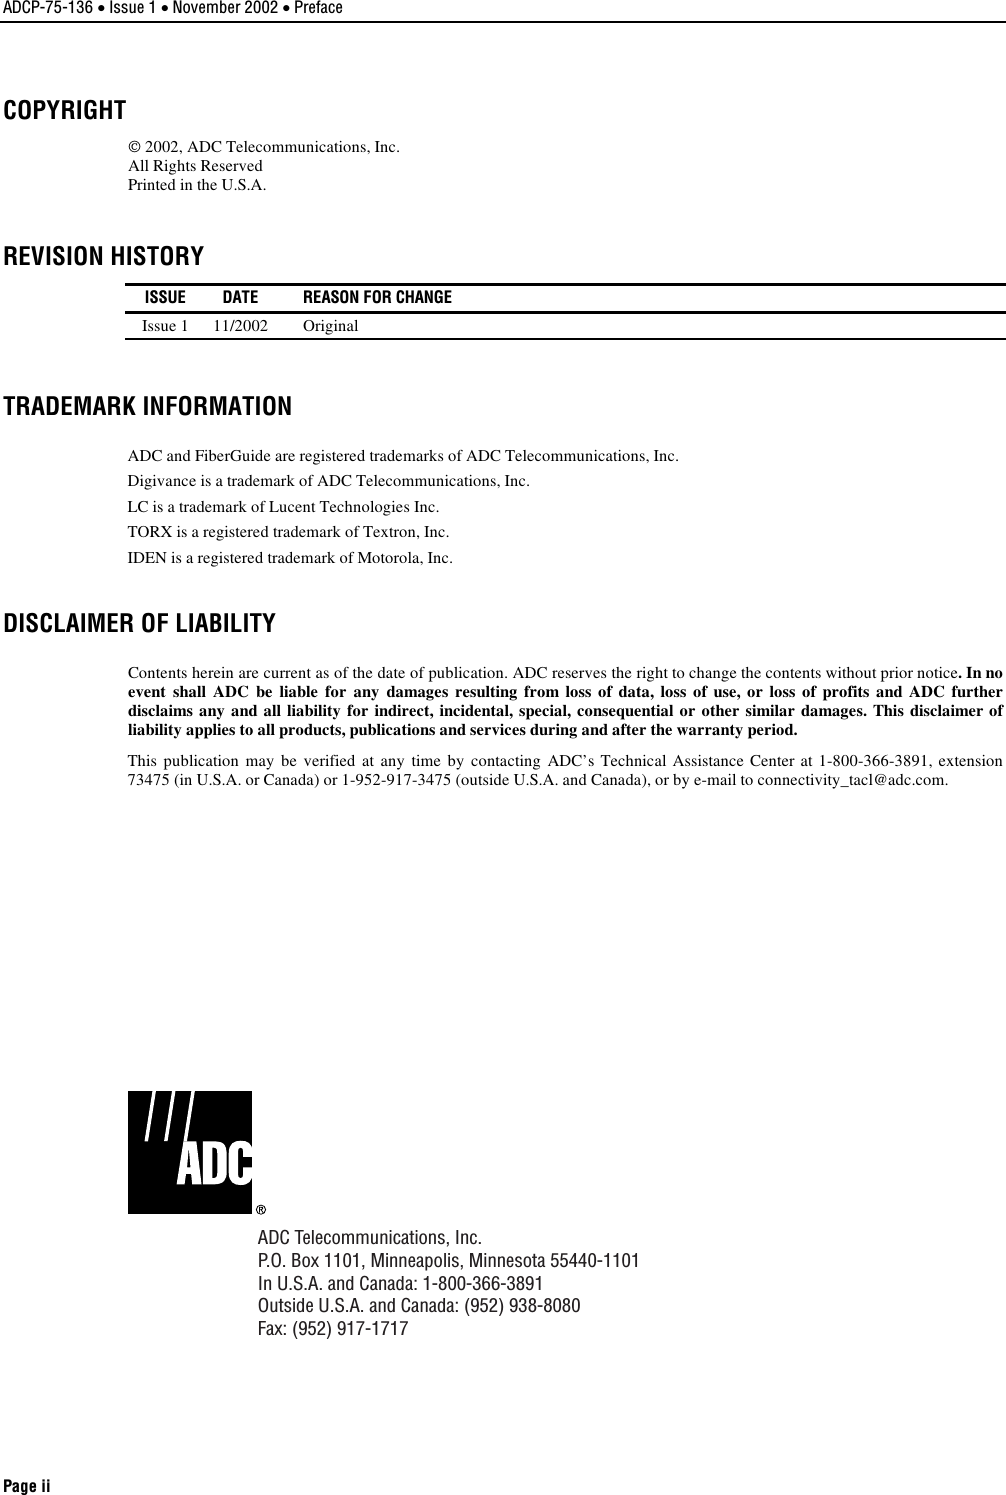 ADCP-75-136 • Issue 1 • November 2002 • Preface Page ii COPYRIGHT 2002, ADC Telecommunications, Inc.All Rights ReservedPrinted in the U.S.A.REVISION HISTORY   ISSUE  DATE  REASON FOR CHANGE Issue 111/2002 OriginalTRADEMARK INFORMATION ADC and FiberGuide are registered trademarks of ADC Telecommunications, Inc.Digivance is atrademark of ADC Telecommunications, Inc.LC is atrademark of Lucent Technologies Inc.TORX is aregistered trademark of Textron, Inc.IDEN is aregistered trademark of Motorola, Inc.DISCLAIMER OF LIABILITY Contents herein are current as of the date of publication. ADC reserves the right to change the contents without prior notice.In noevent shall ADC be liable for any damages resulting from loss of data, loss of use, or loss of profits and ADC furtherdisclaims any and all liability for indirect, incidental, special, consequential or other similar damages. This disclaimer ofliability applies to all products, publications and services during and after the warranty period.This publication may be verified at any time by contacting ADC’s Technical Assistance Center at 1-800-366-3891, extension73475 (in U.S.A. or Canada) or 1-952-917-3475 (outside U.S.A. and Canada), or by e-mail to connectivity_tacl@adc.com.ADC Telecommunications, Inc.P.O. Box 1101, Minneapolis, Minnesota 55440-1101In U.S.A. and Canada: 1-800-366-3891Outside U.S.A. and Canada: (952) 938-8080Fax: (952) 917-1717